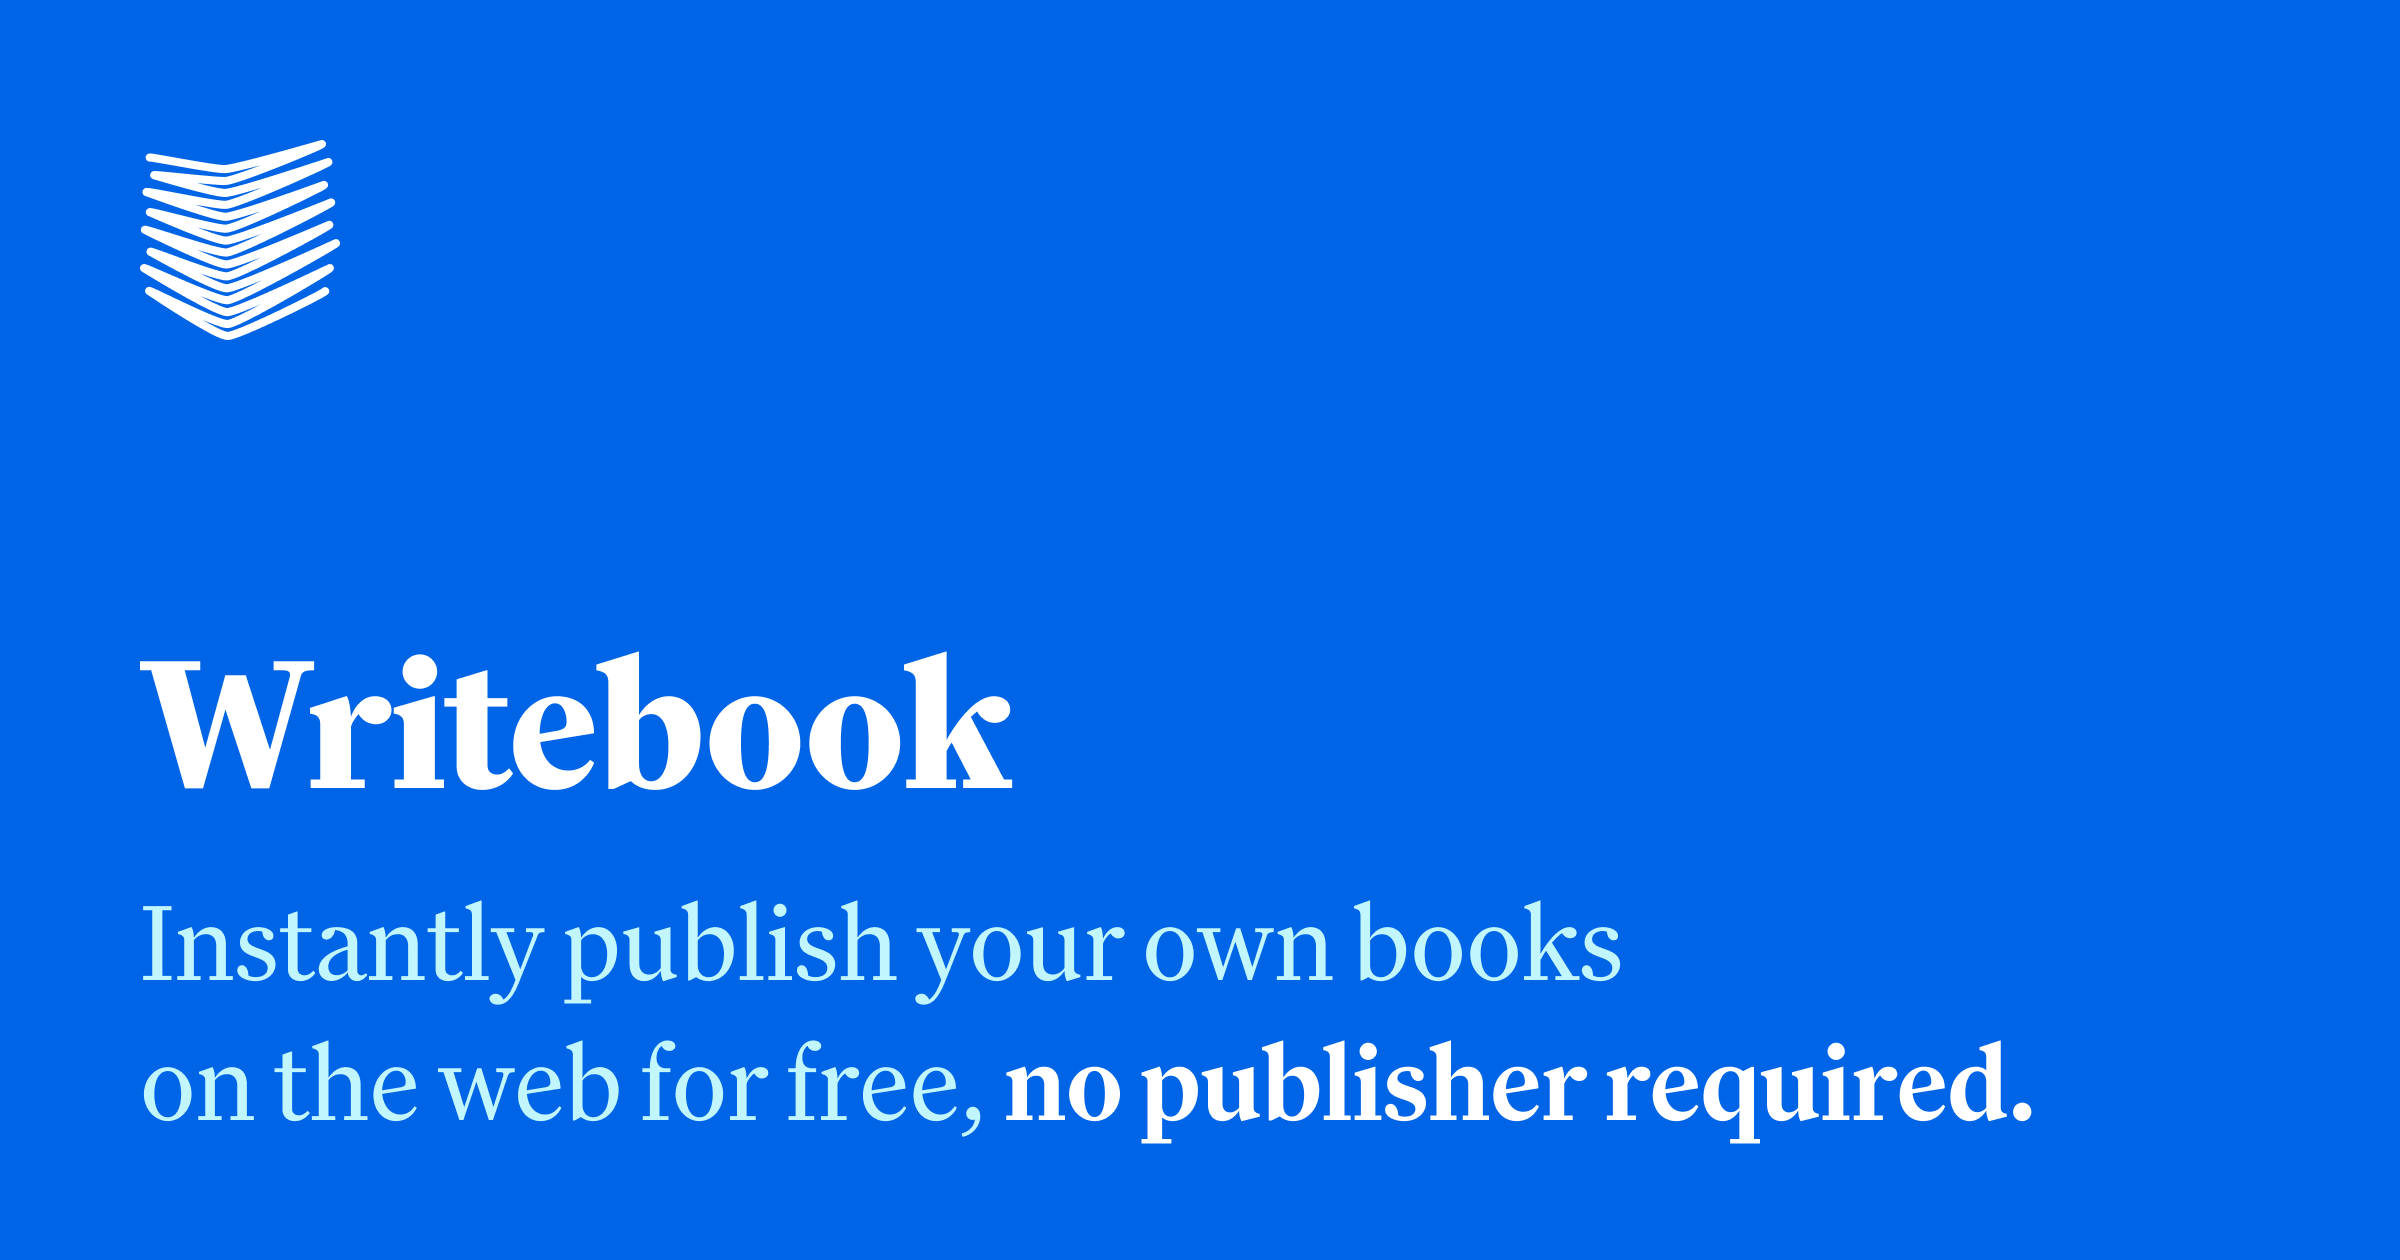 startuptile Writebook-Instantly publish your own books on the web for free